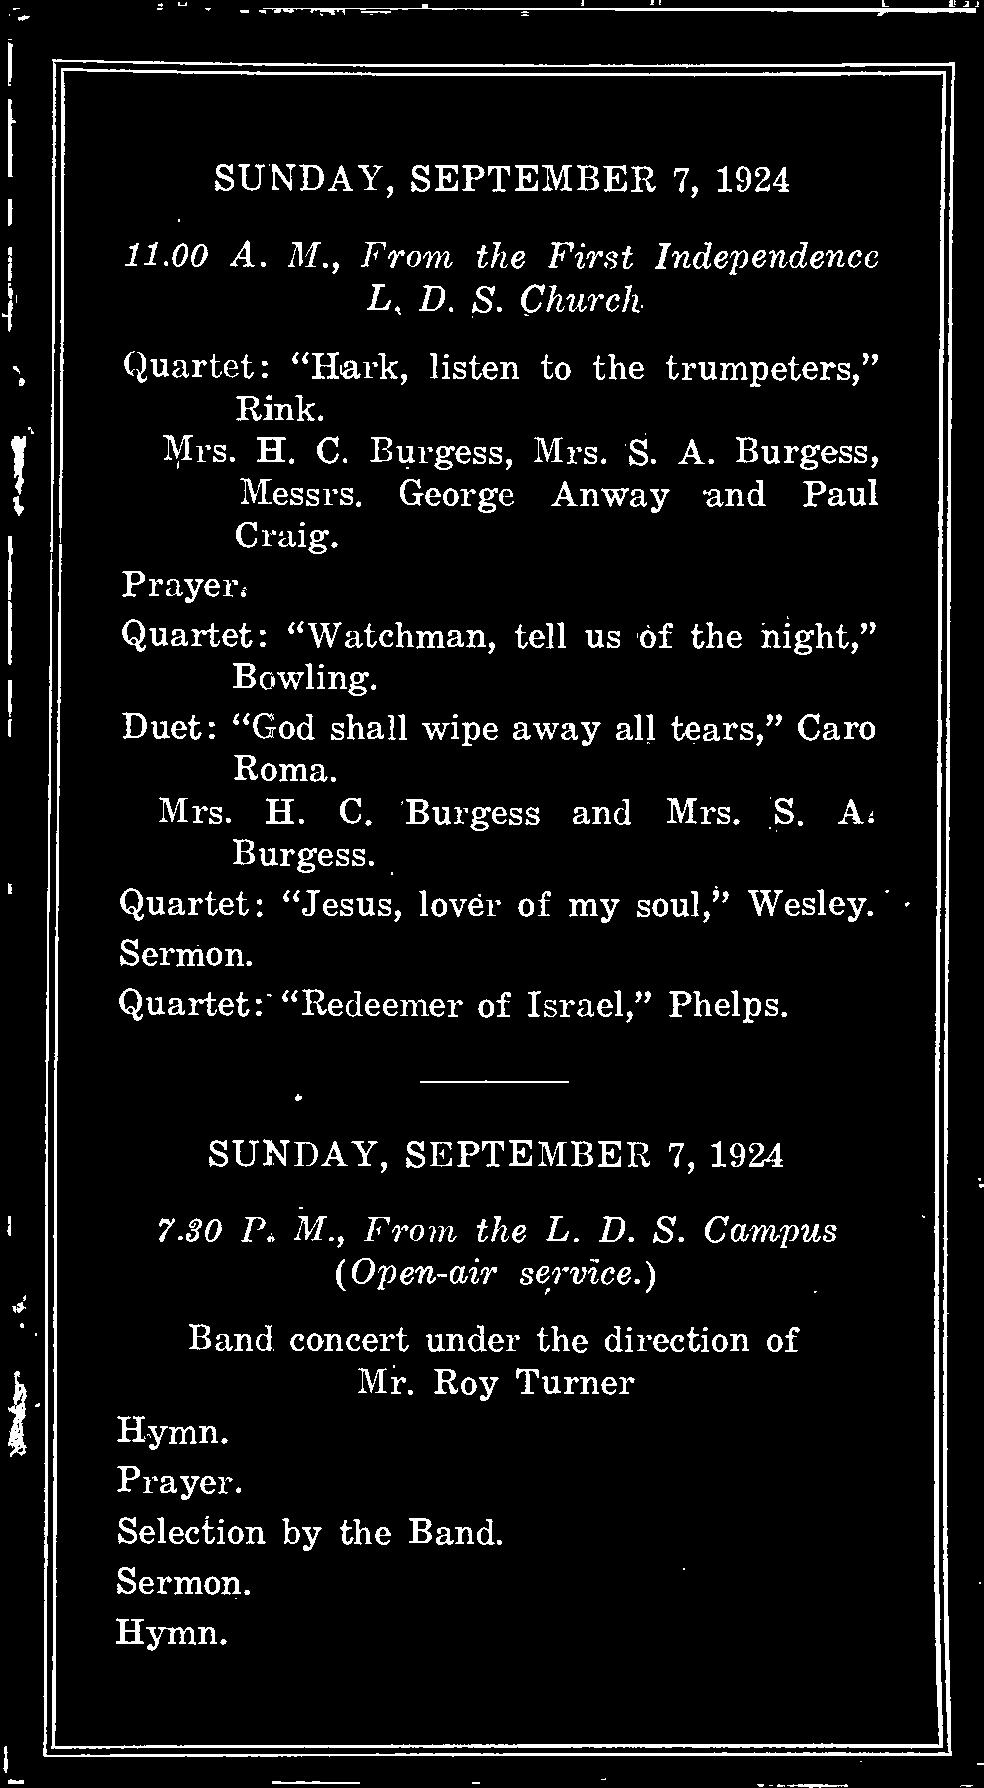 Duet: "God shall wipe away all tears," Caro Roma. Mrs. H. C. Burgess and Mrs. S. A. Burgess. Quartet: "Jesus, lover of my soul," Wesley. Sermon.